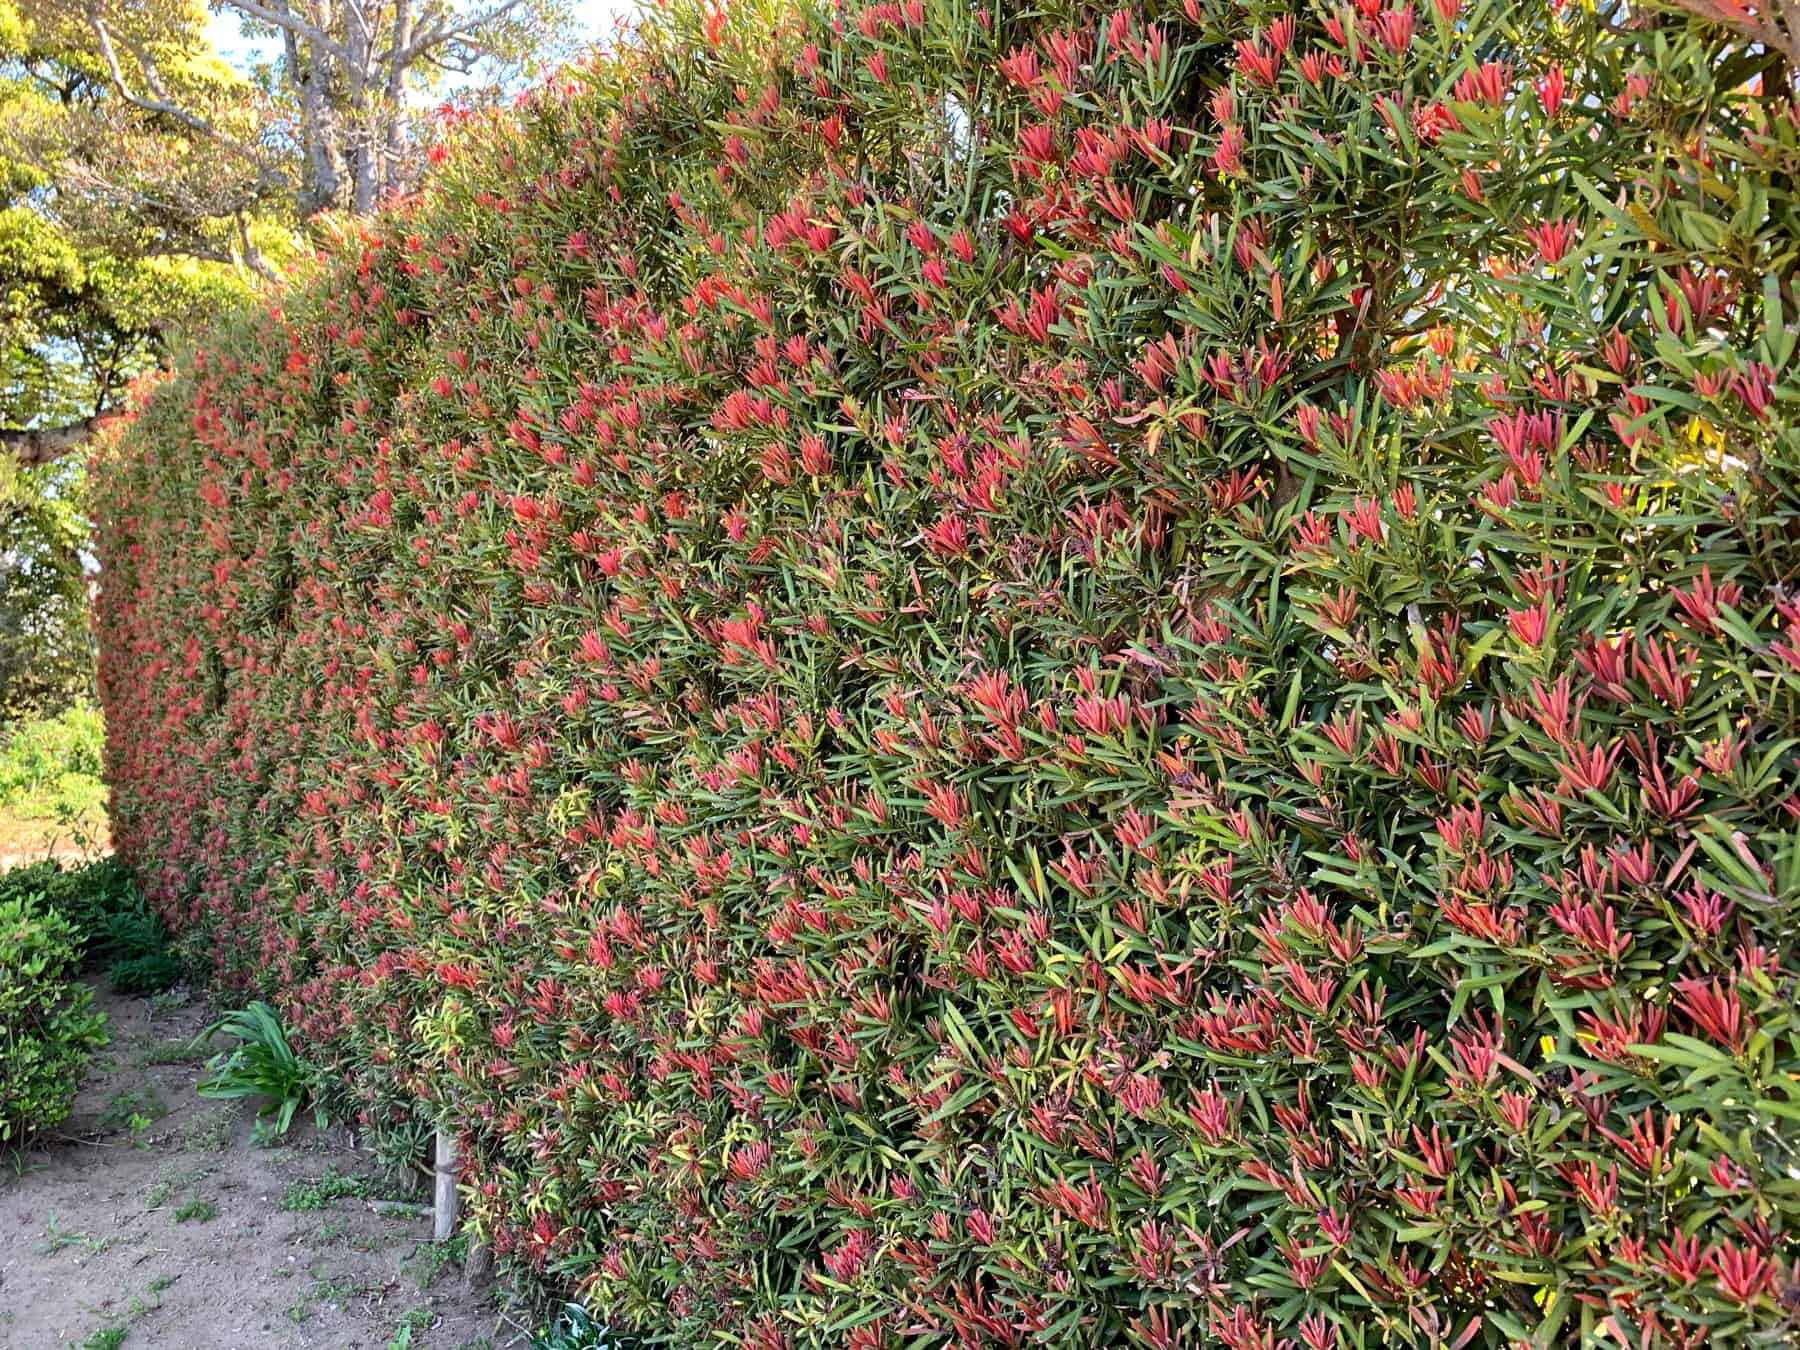 A wall of foliage shorn and formed with the pink and green foliage of Mood Ring Podocarpus